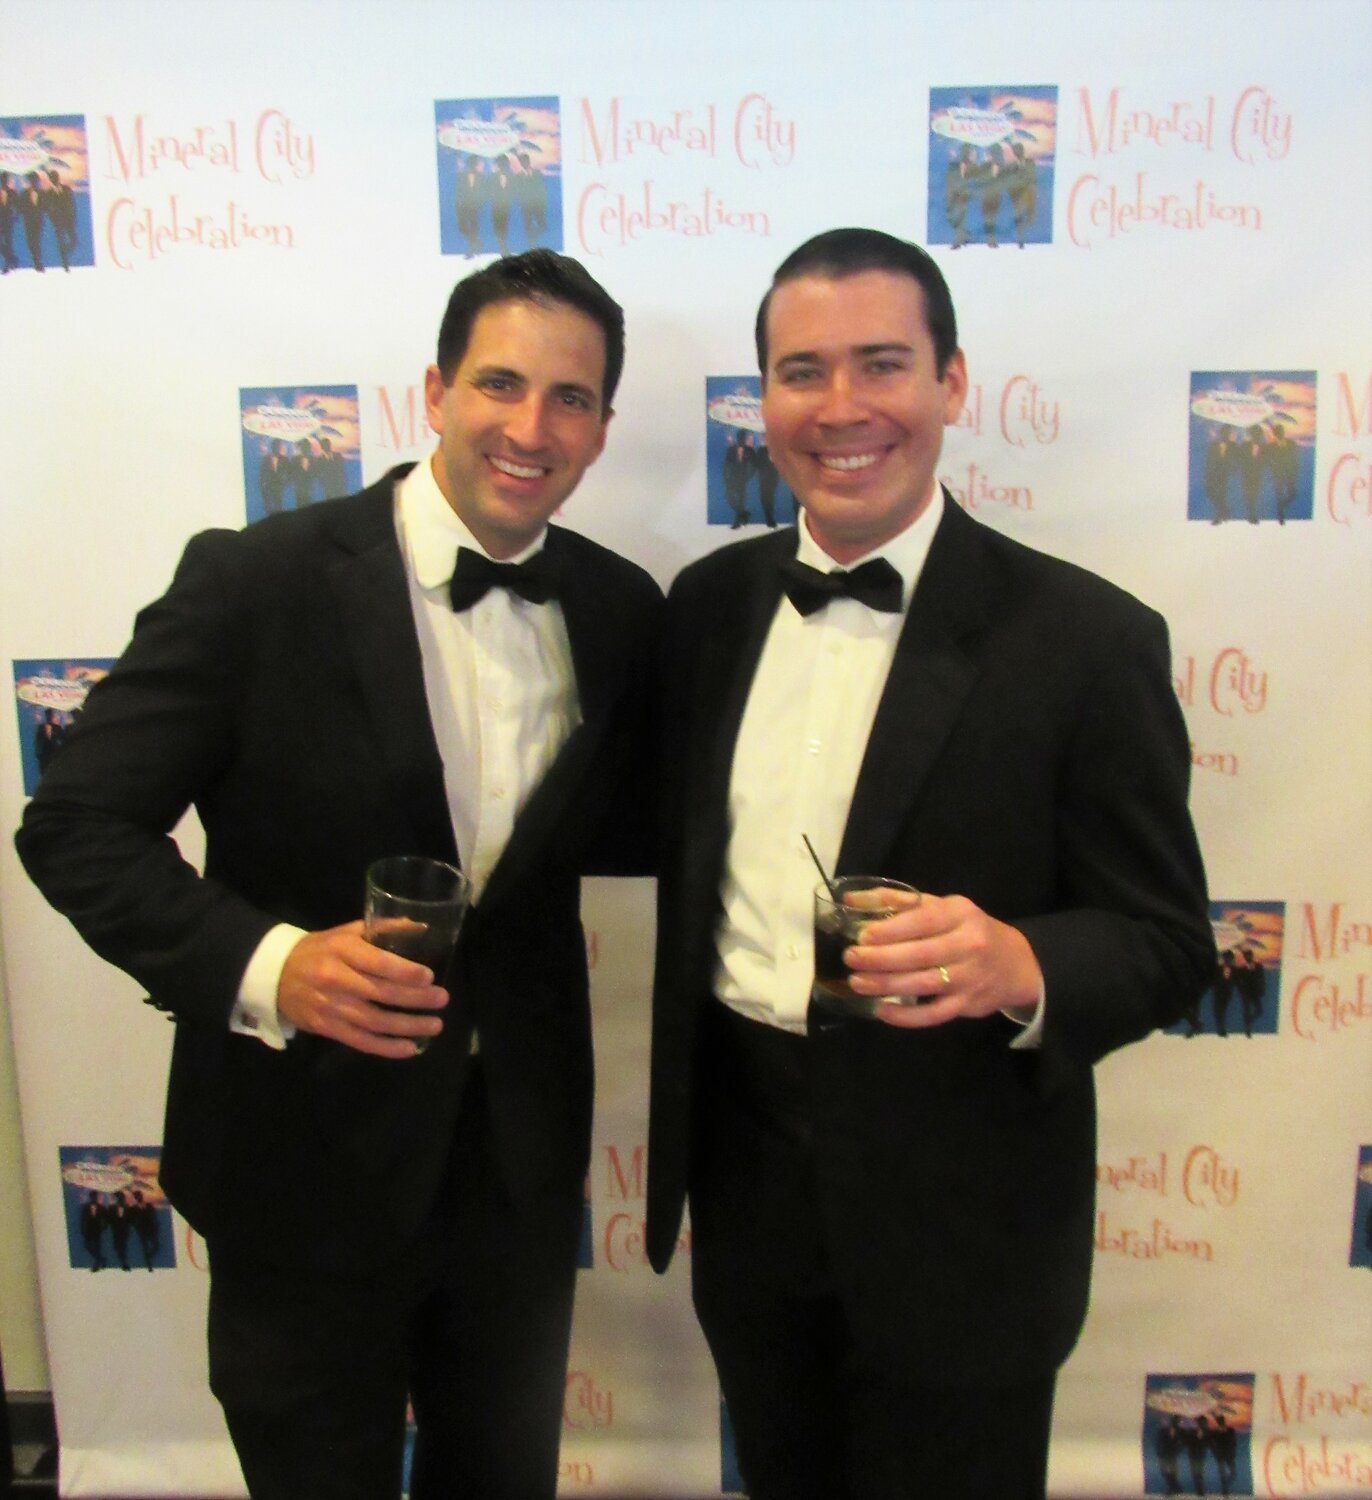 Doug Crescimanno and Bryan Logue portrayed Dean Martin and Frank Sinatra at the Rat Pack-themed gala.